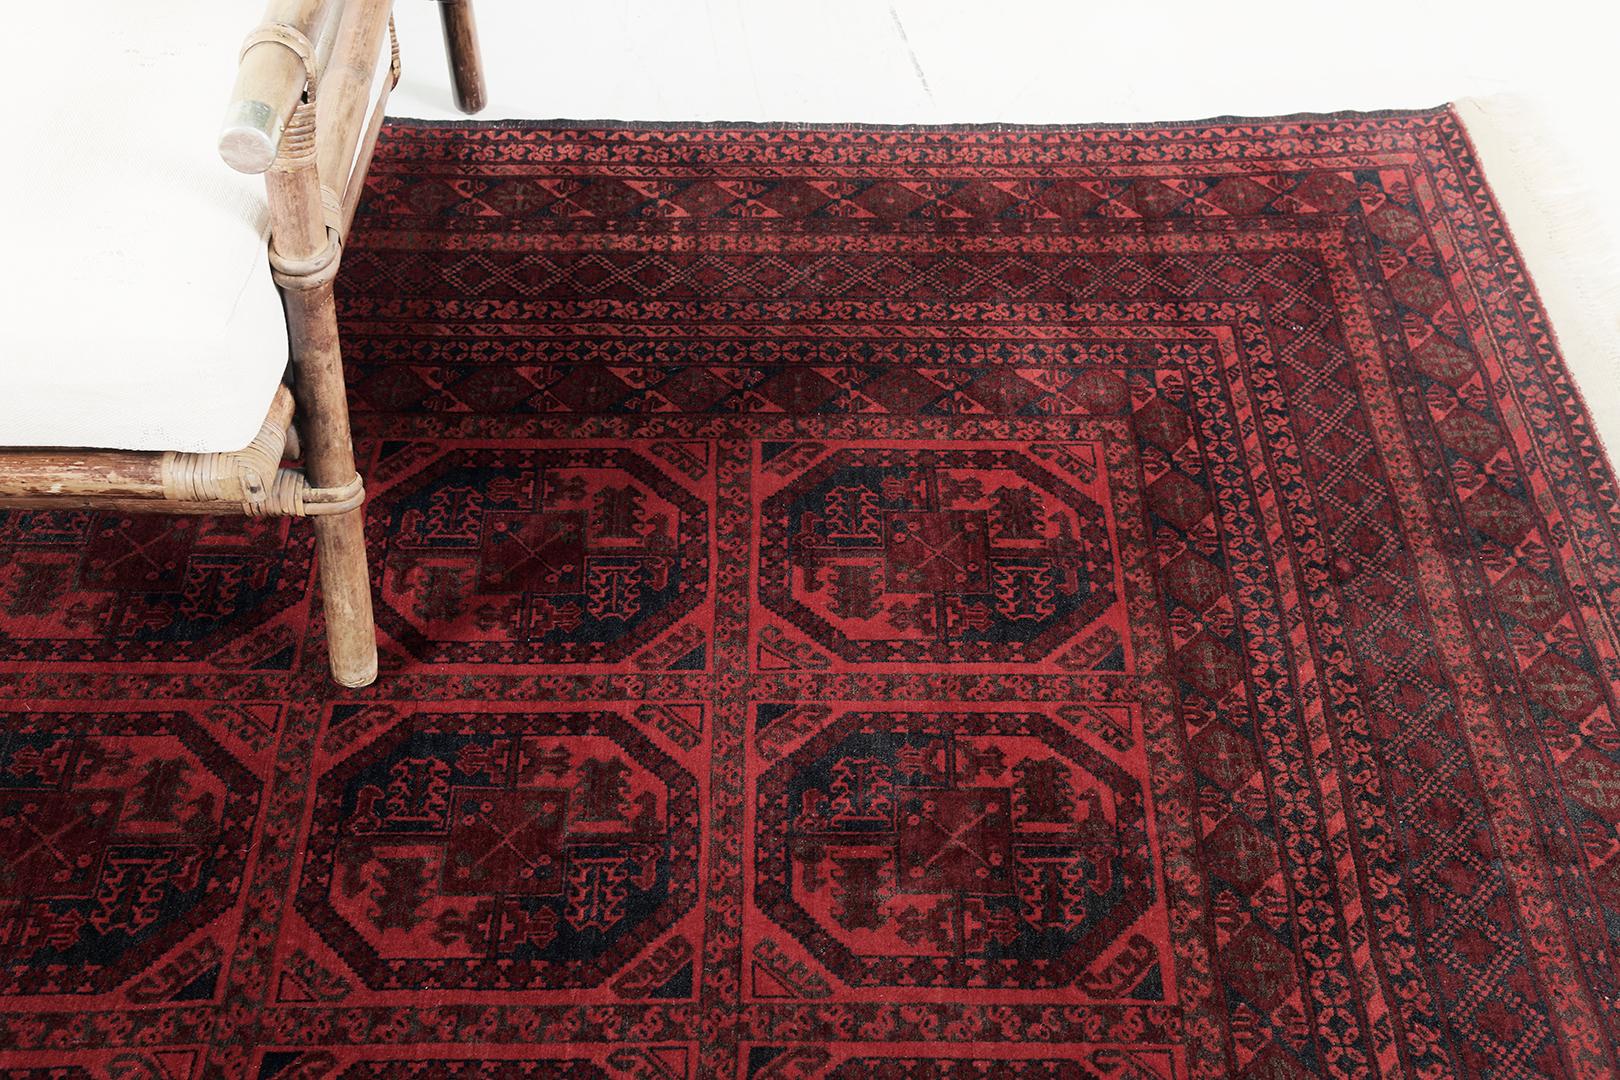 A ravishing Bokhara Design Rug that features a majestic panel design in the most captivating design scheme. It has an illuminating wine red colour palette that creates a breathtaking impact brought to its viewers. A mesmerizing rug that will